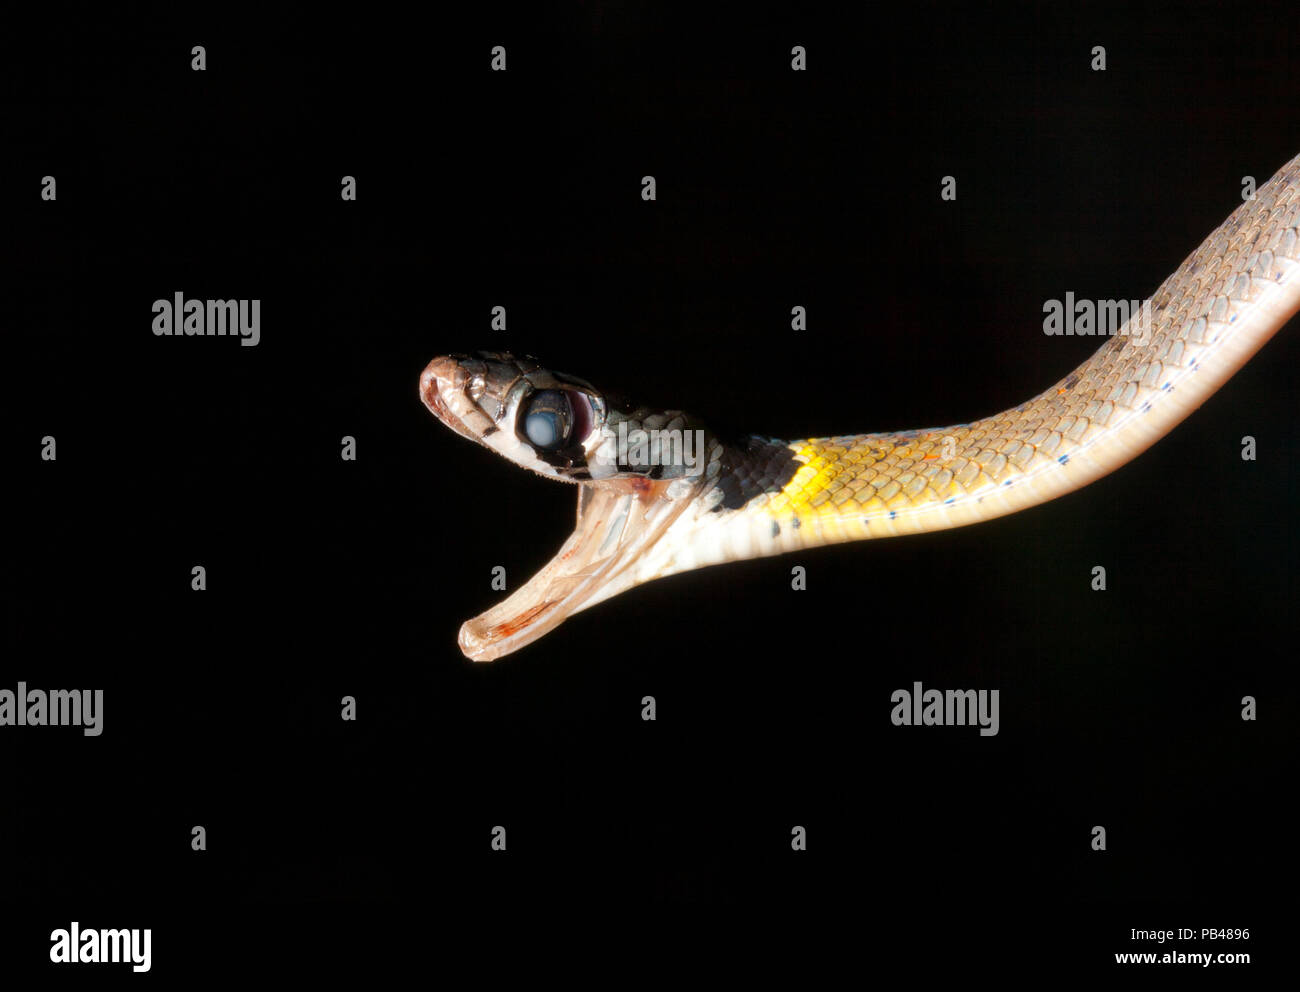 Attacking snake isolated on black Stock Photo